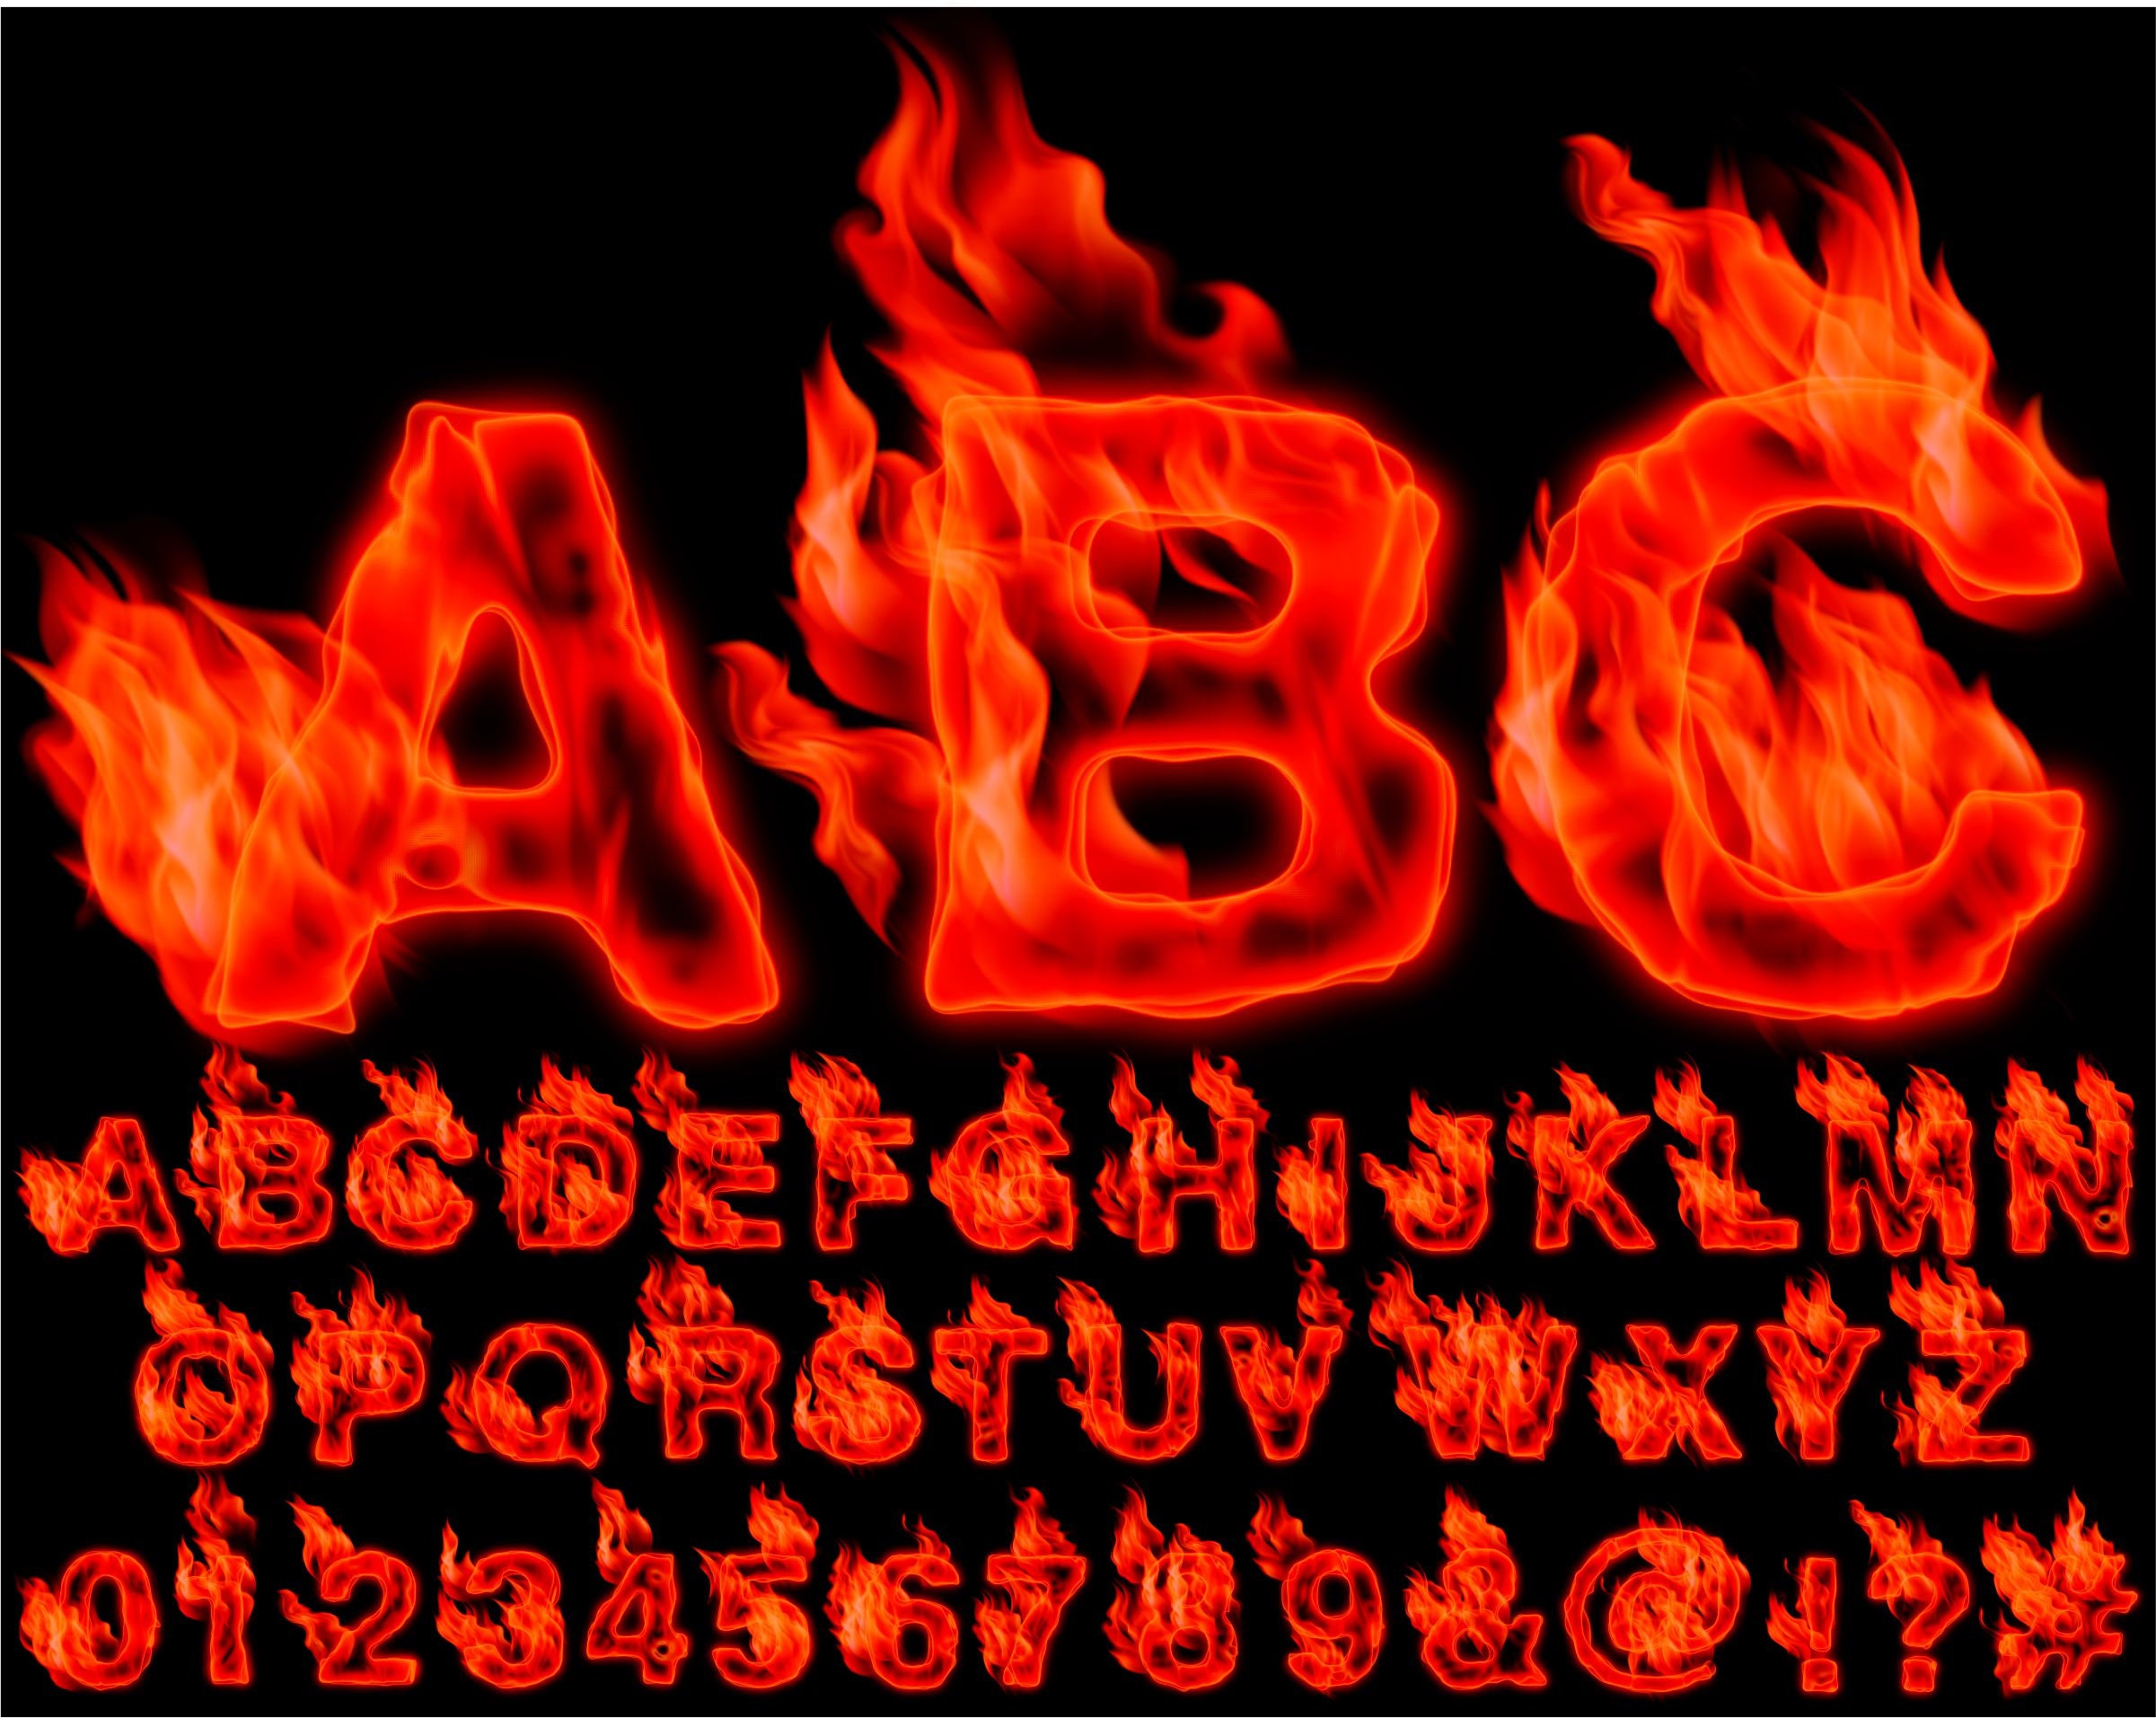 Red Fire PNG Letters, Transparent Background, Flame Alphabet Clip Art, PNG, Fire  Letters, Flame Letters, Burn Letters, Red Fire 47AT 